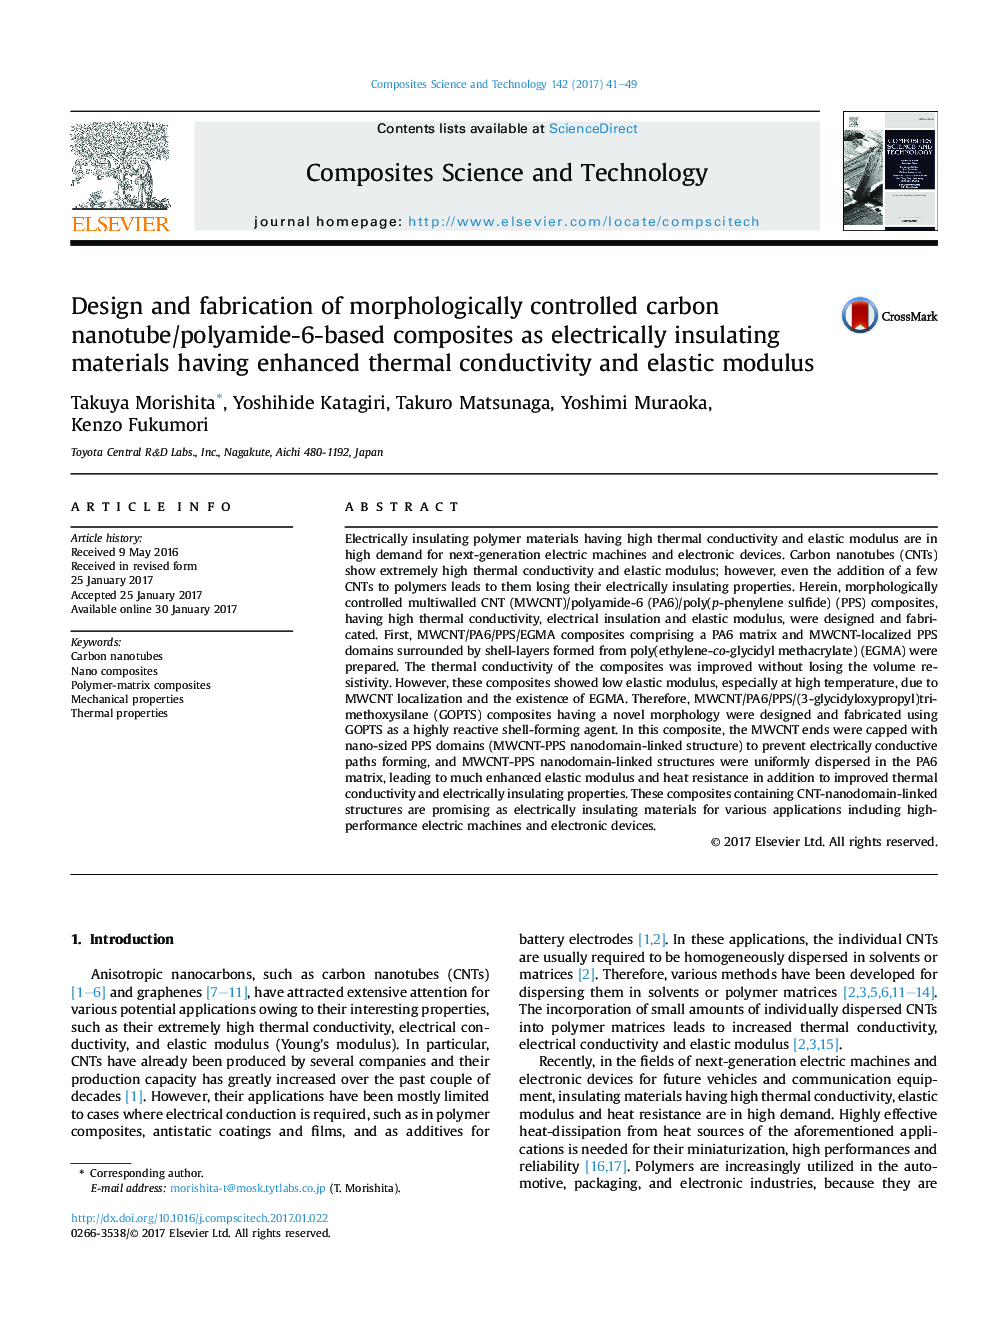 Design and fabrication of morphologically controlled carbon nanotube/polyamide-6-based composites as electrically insulating materials having enhanced thermal conductivity and elastic modulus